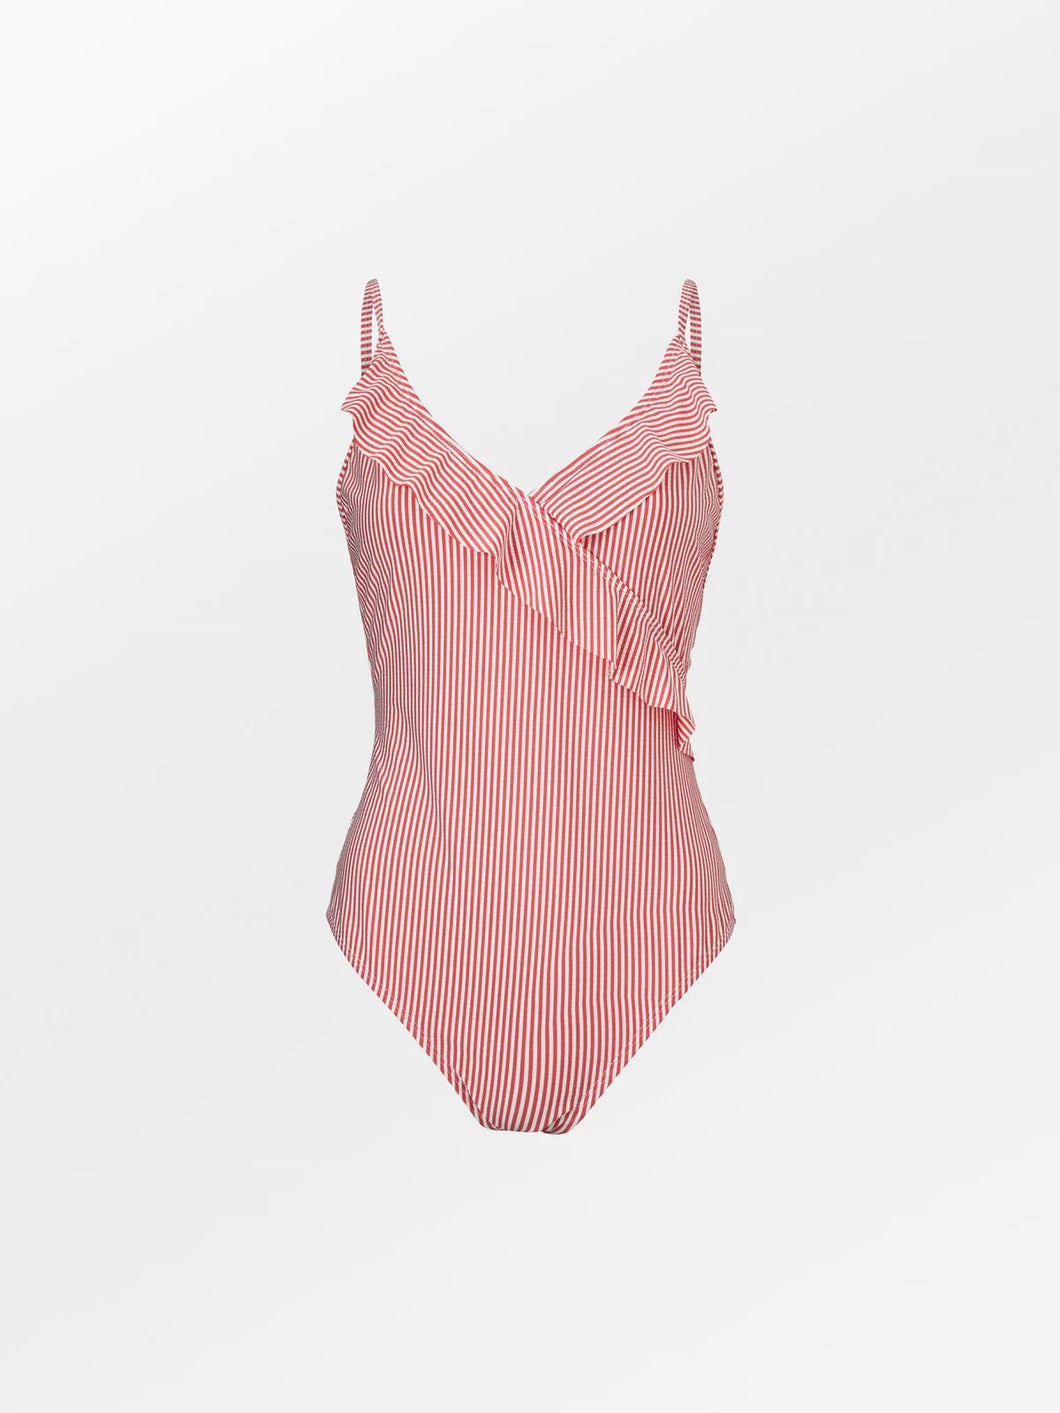 BS Striba Bly Frill Swimsuit €85